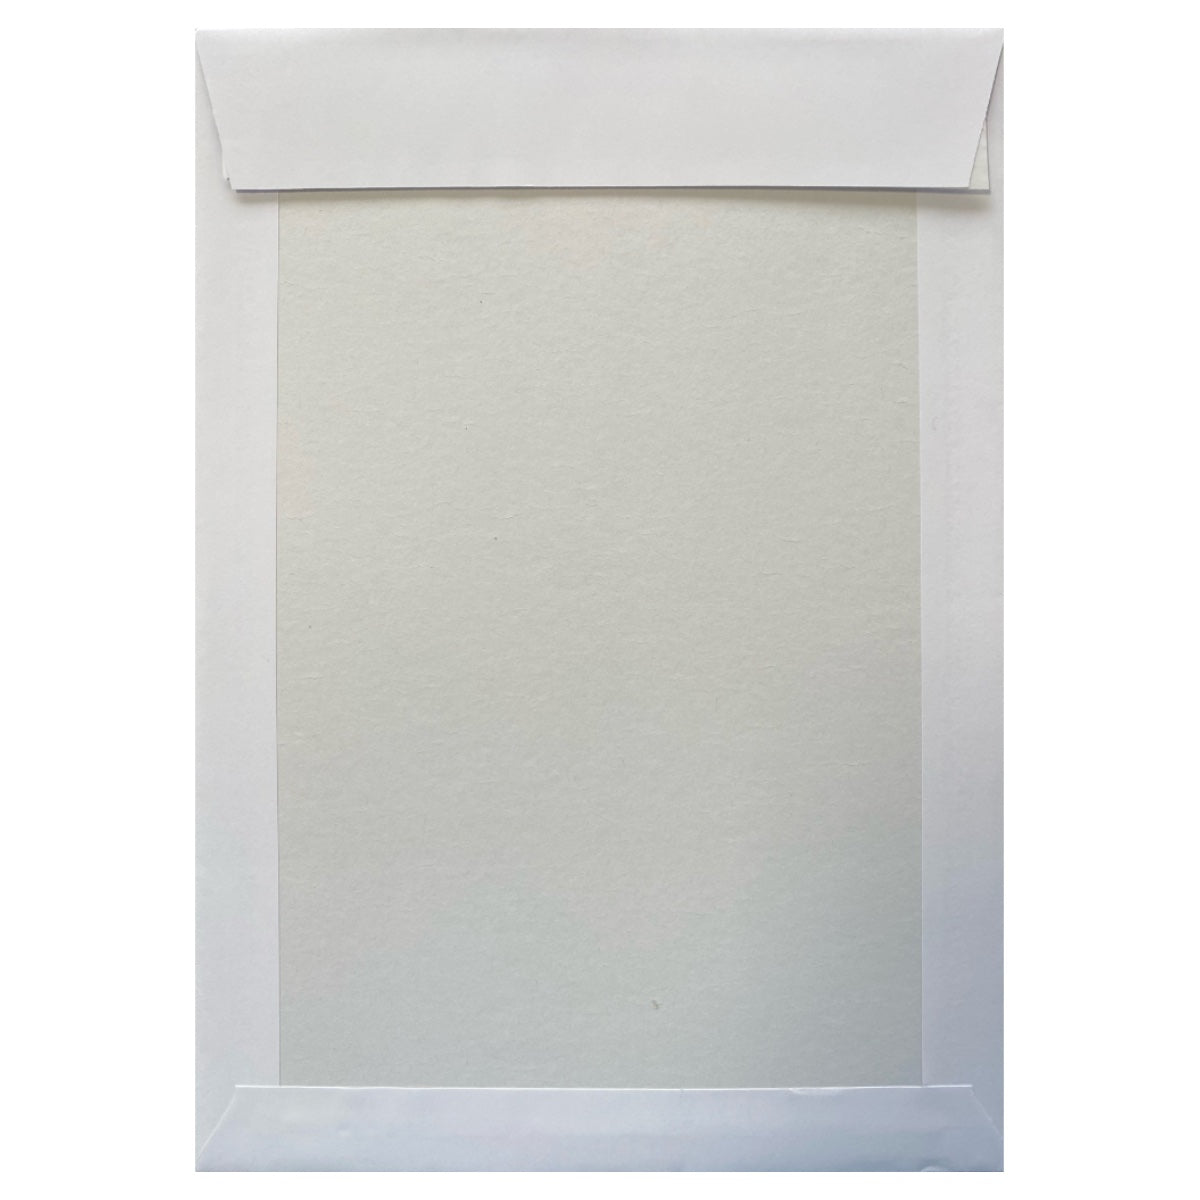 Elco Envelope back made of cardboard, 324 x 229 mm, 13 x 9 inches, C4, 120/475gsm, White